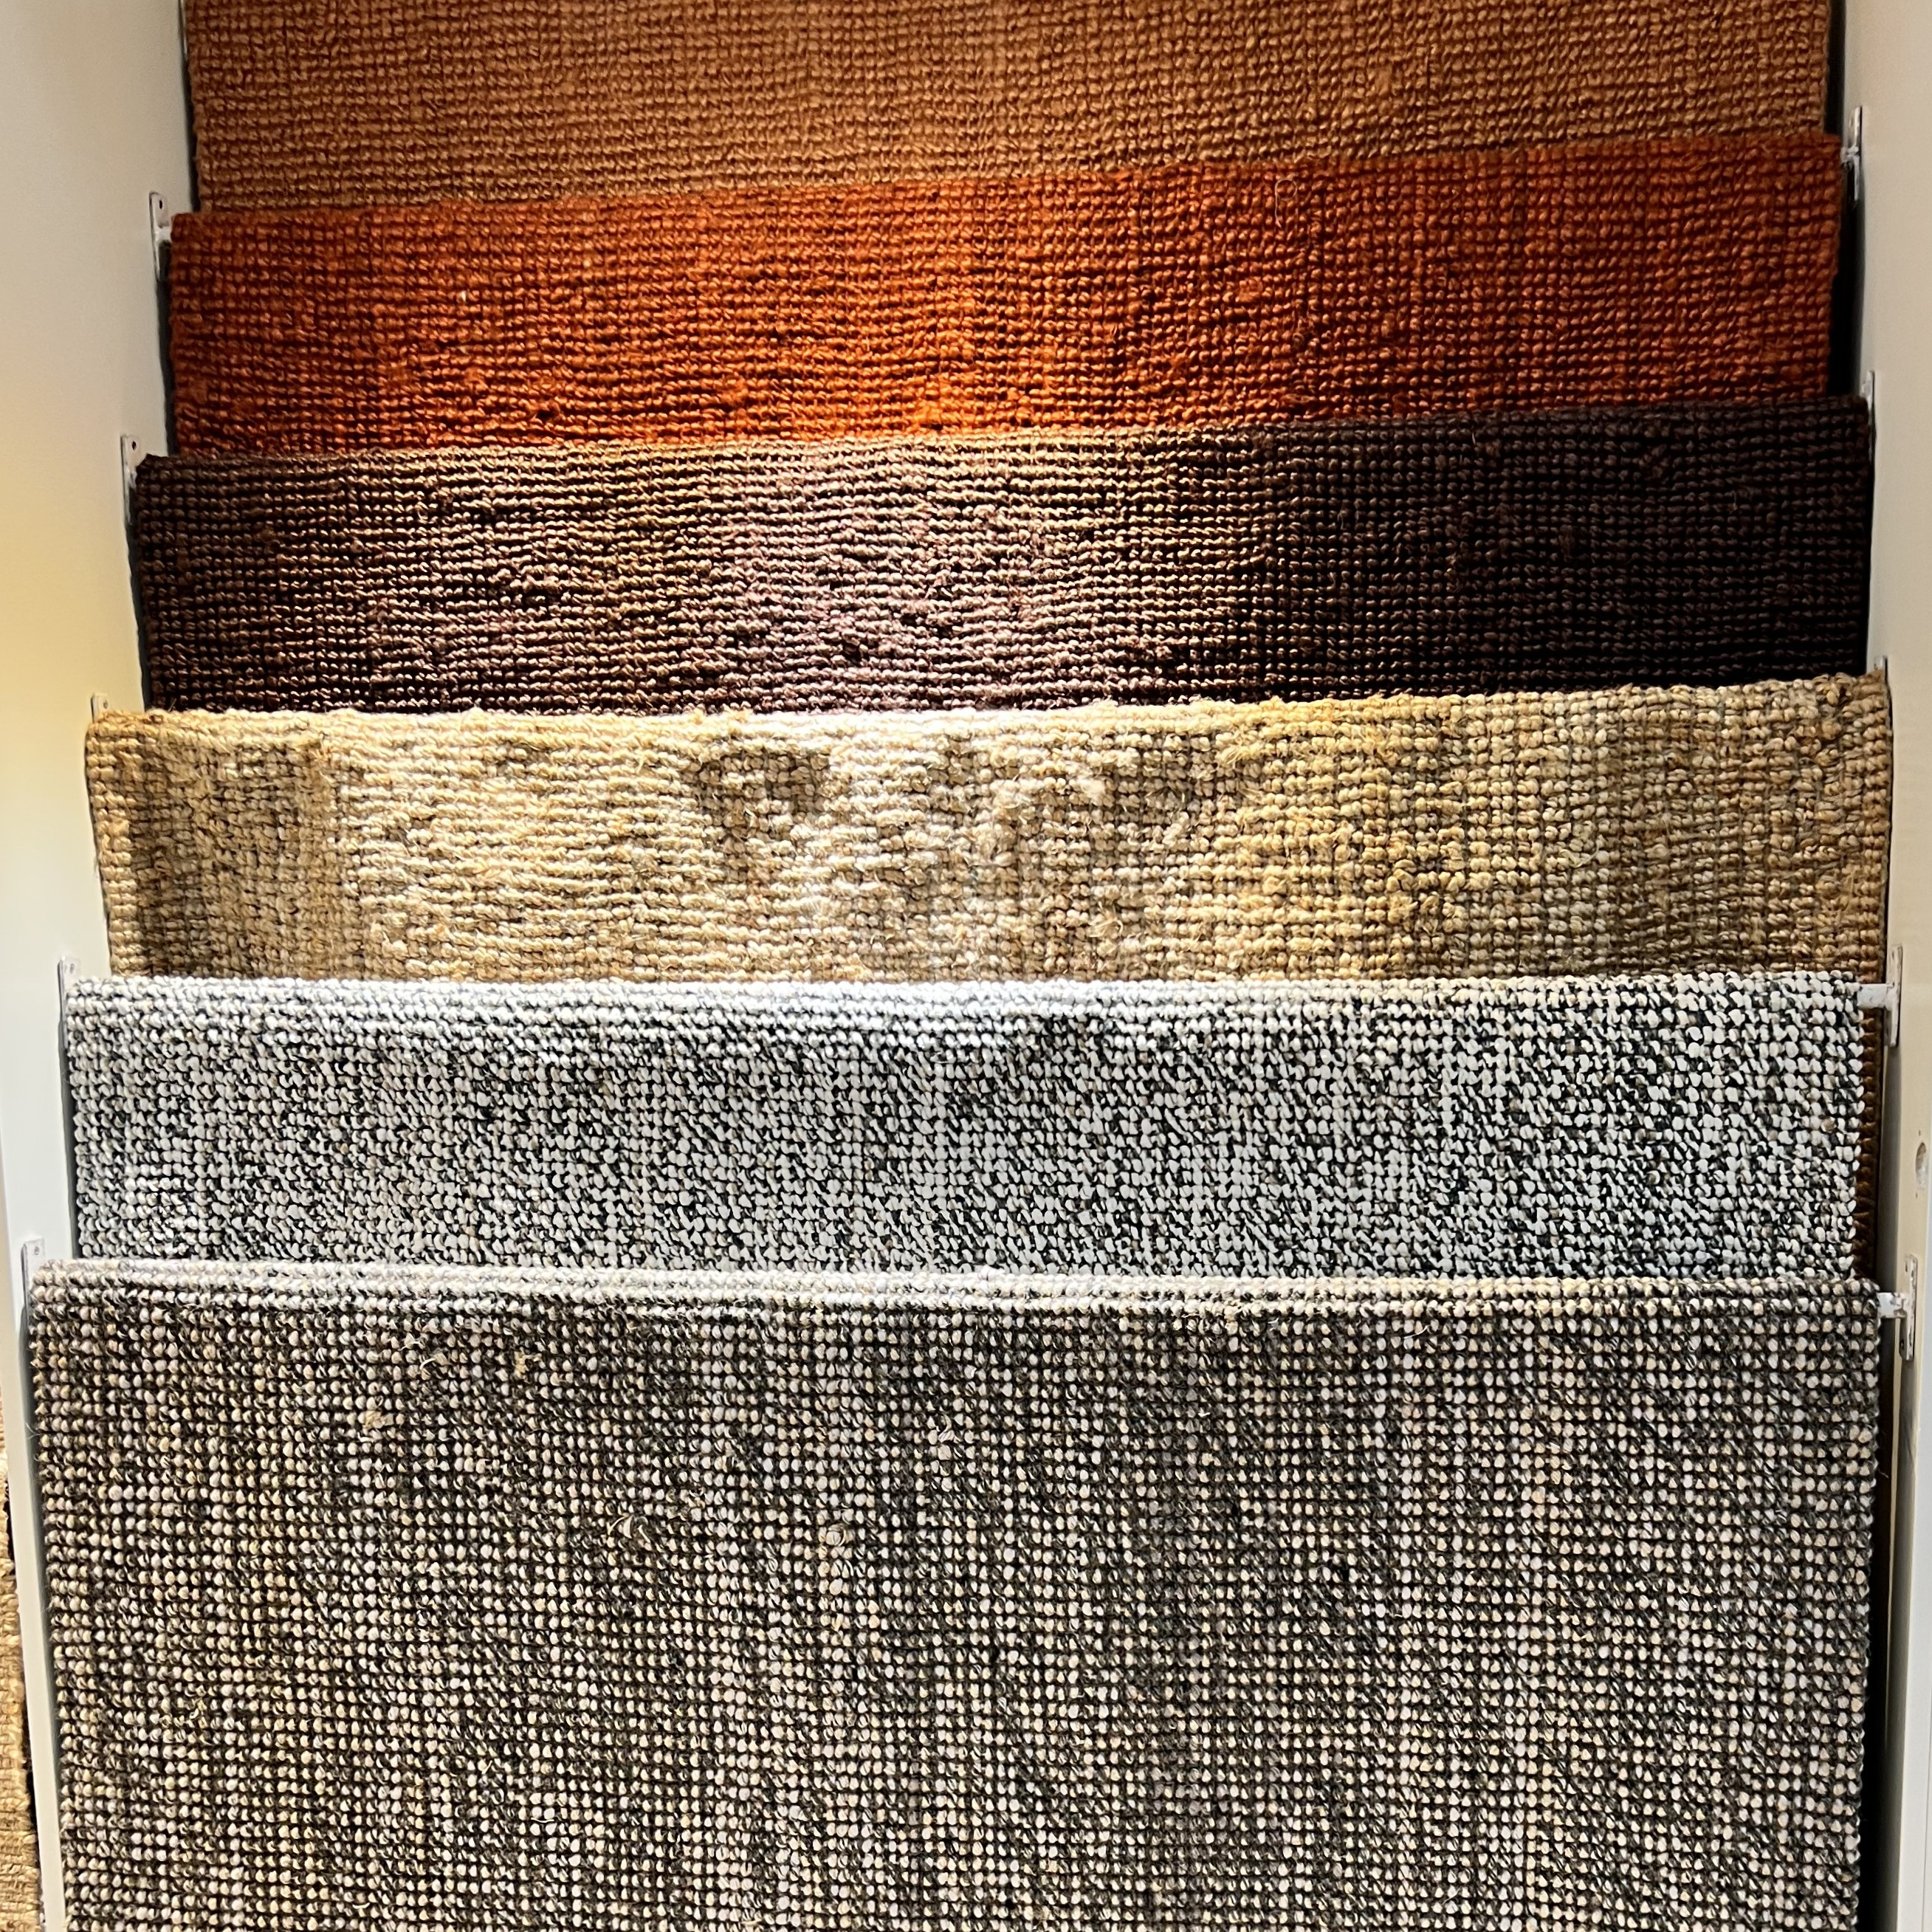 Hanging rug samples using sustainable textiles - photo